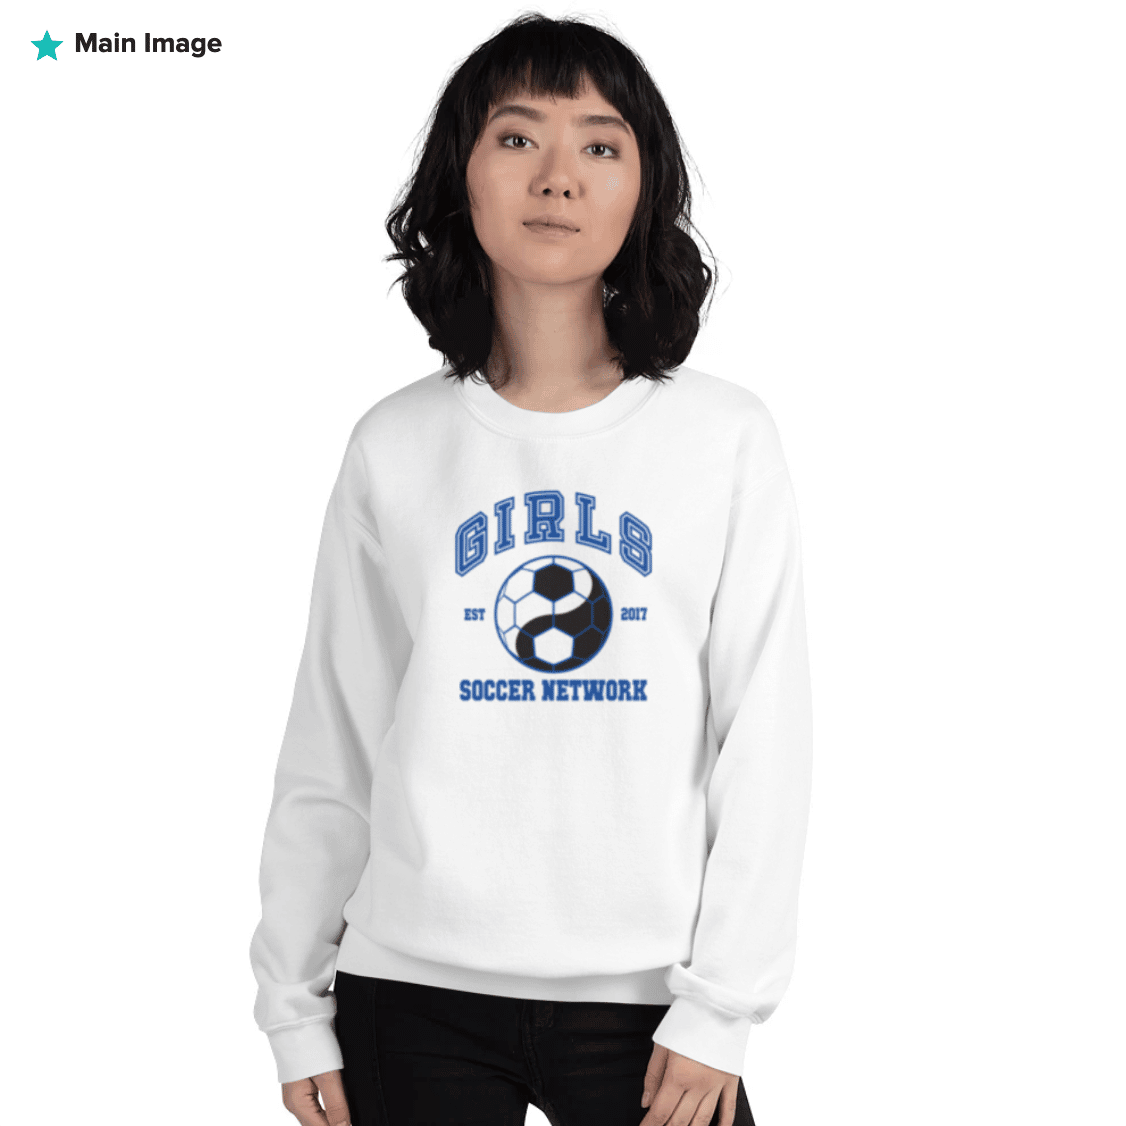 The Classic: Girls Soccer Network White Crewneck